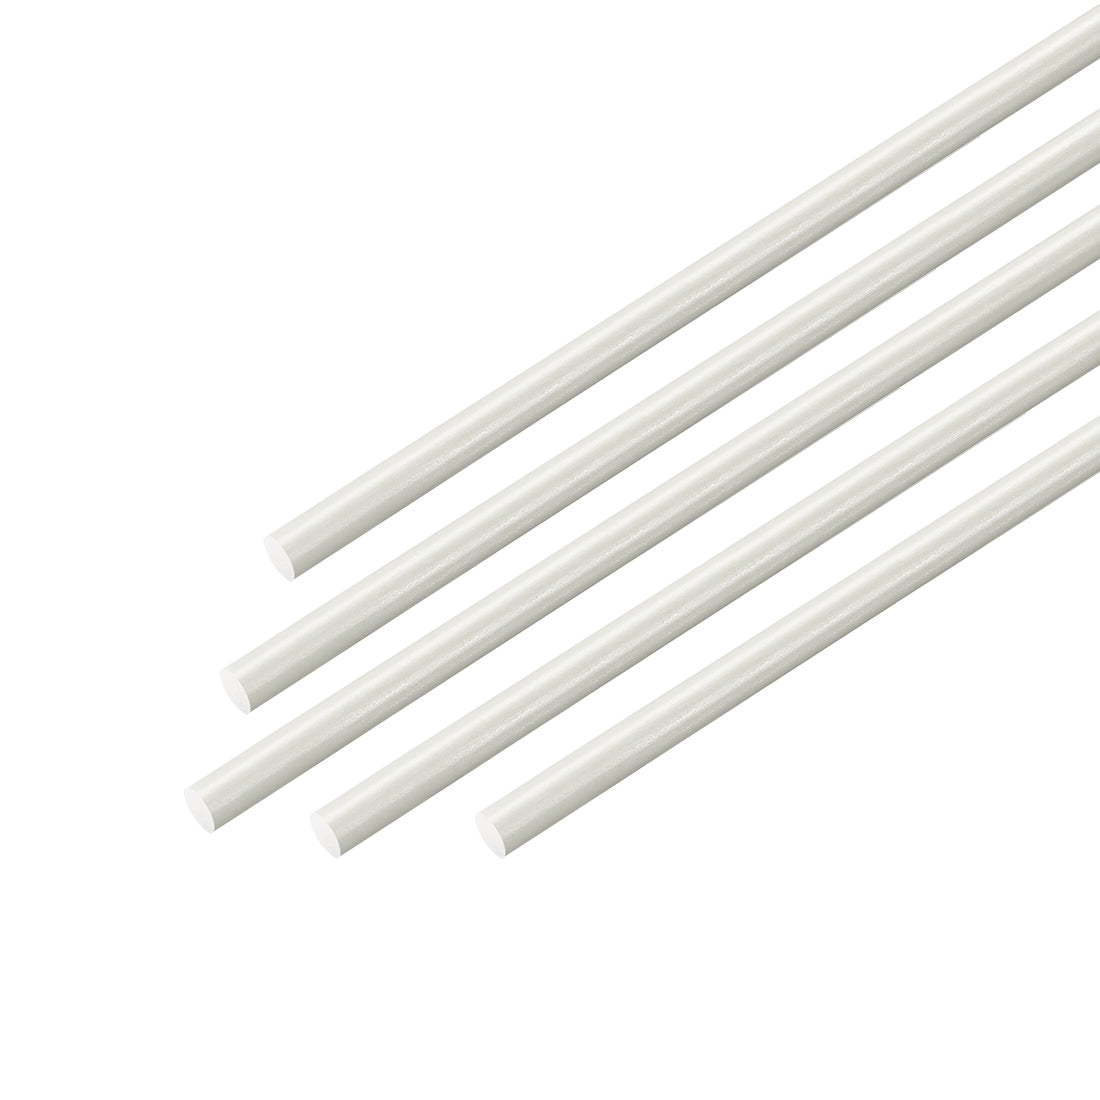 uxcell Uxcell FRP Fiberglass Round Rod,3mm Dia 50cm Long,White Engineering Round Bars 5pcs